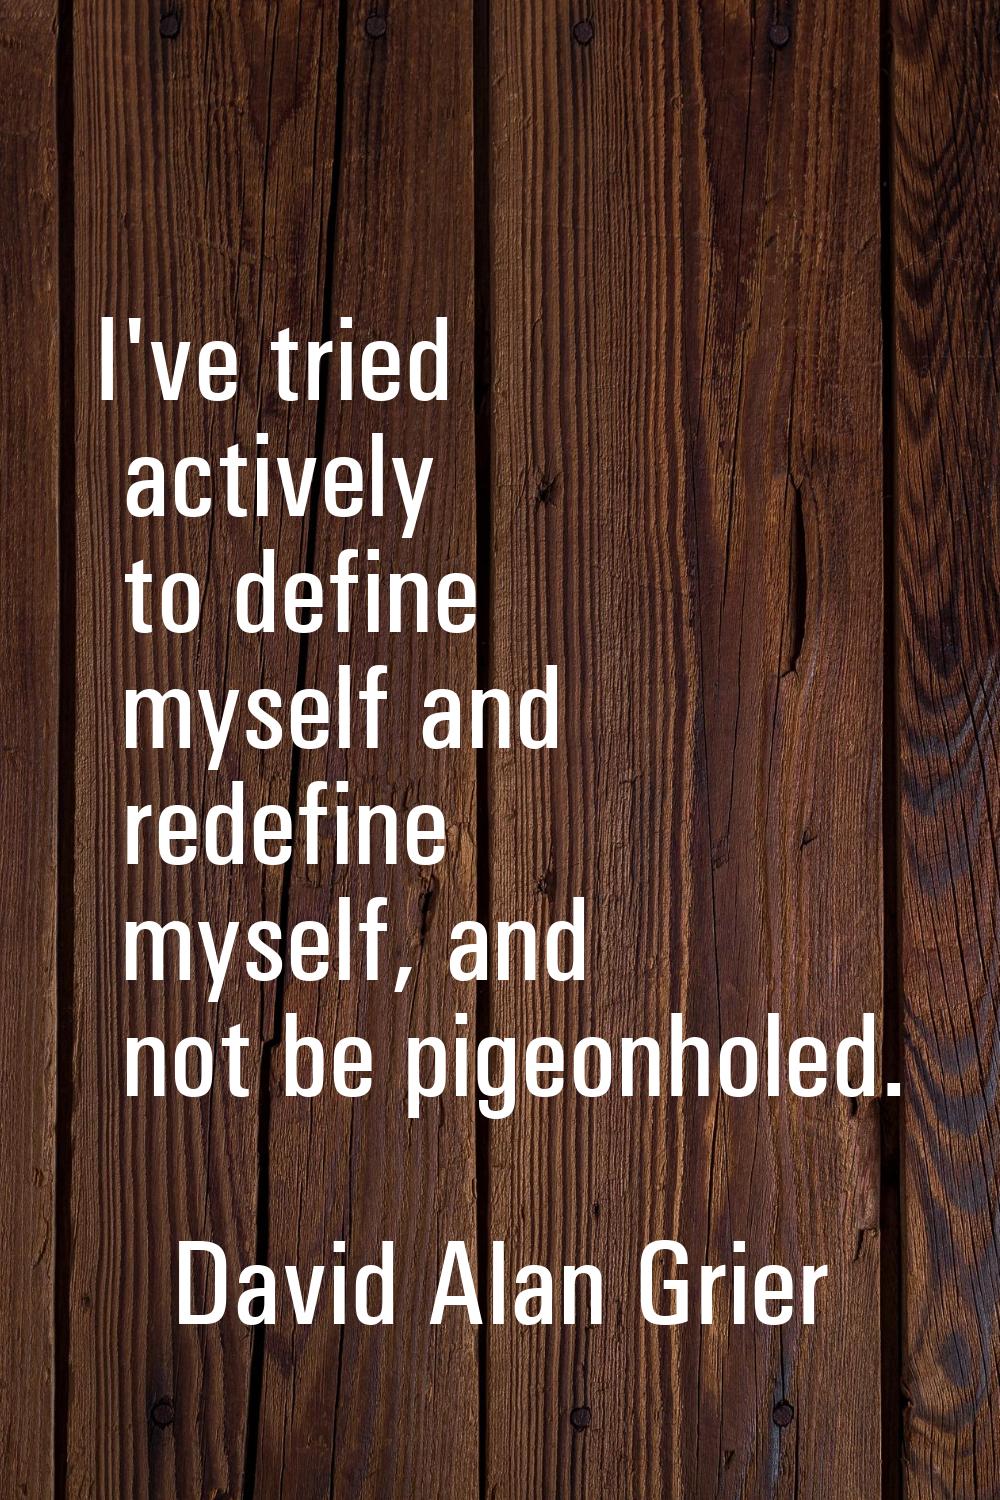 I've tried actively to define myself and redefine myself, and not be pigeonholed.